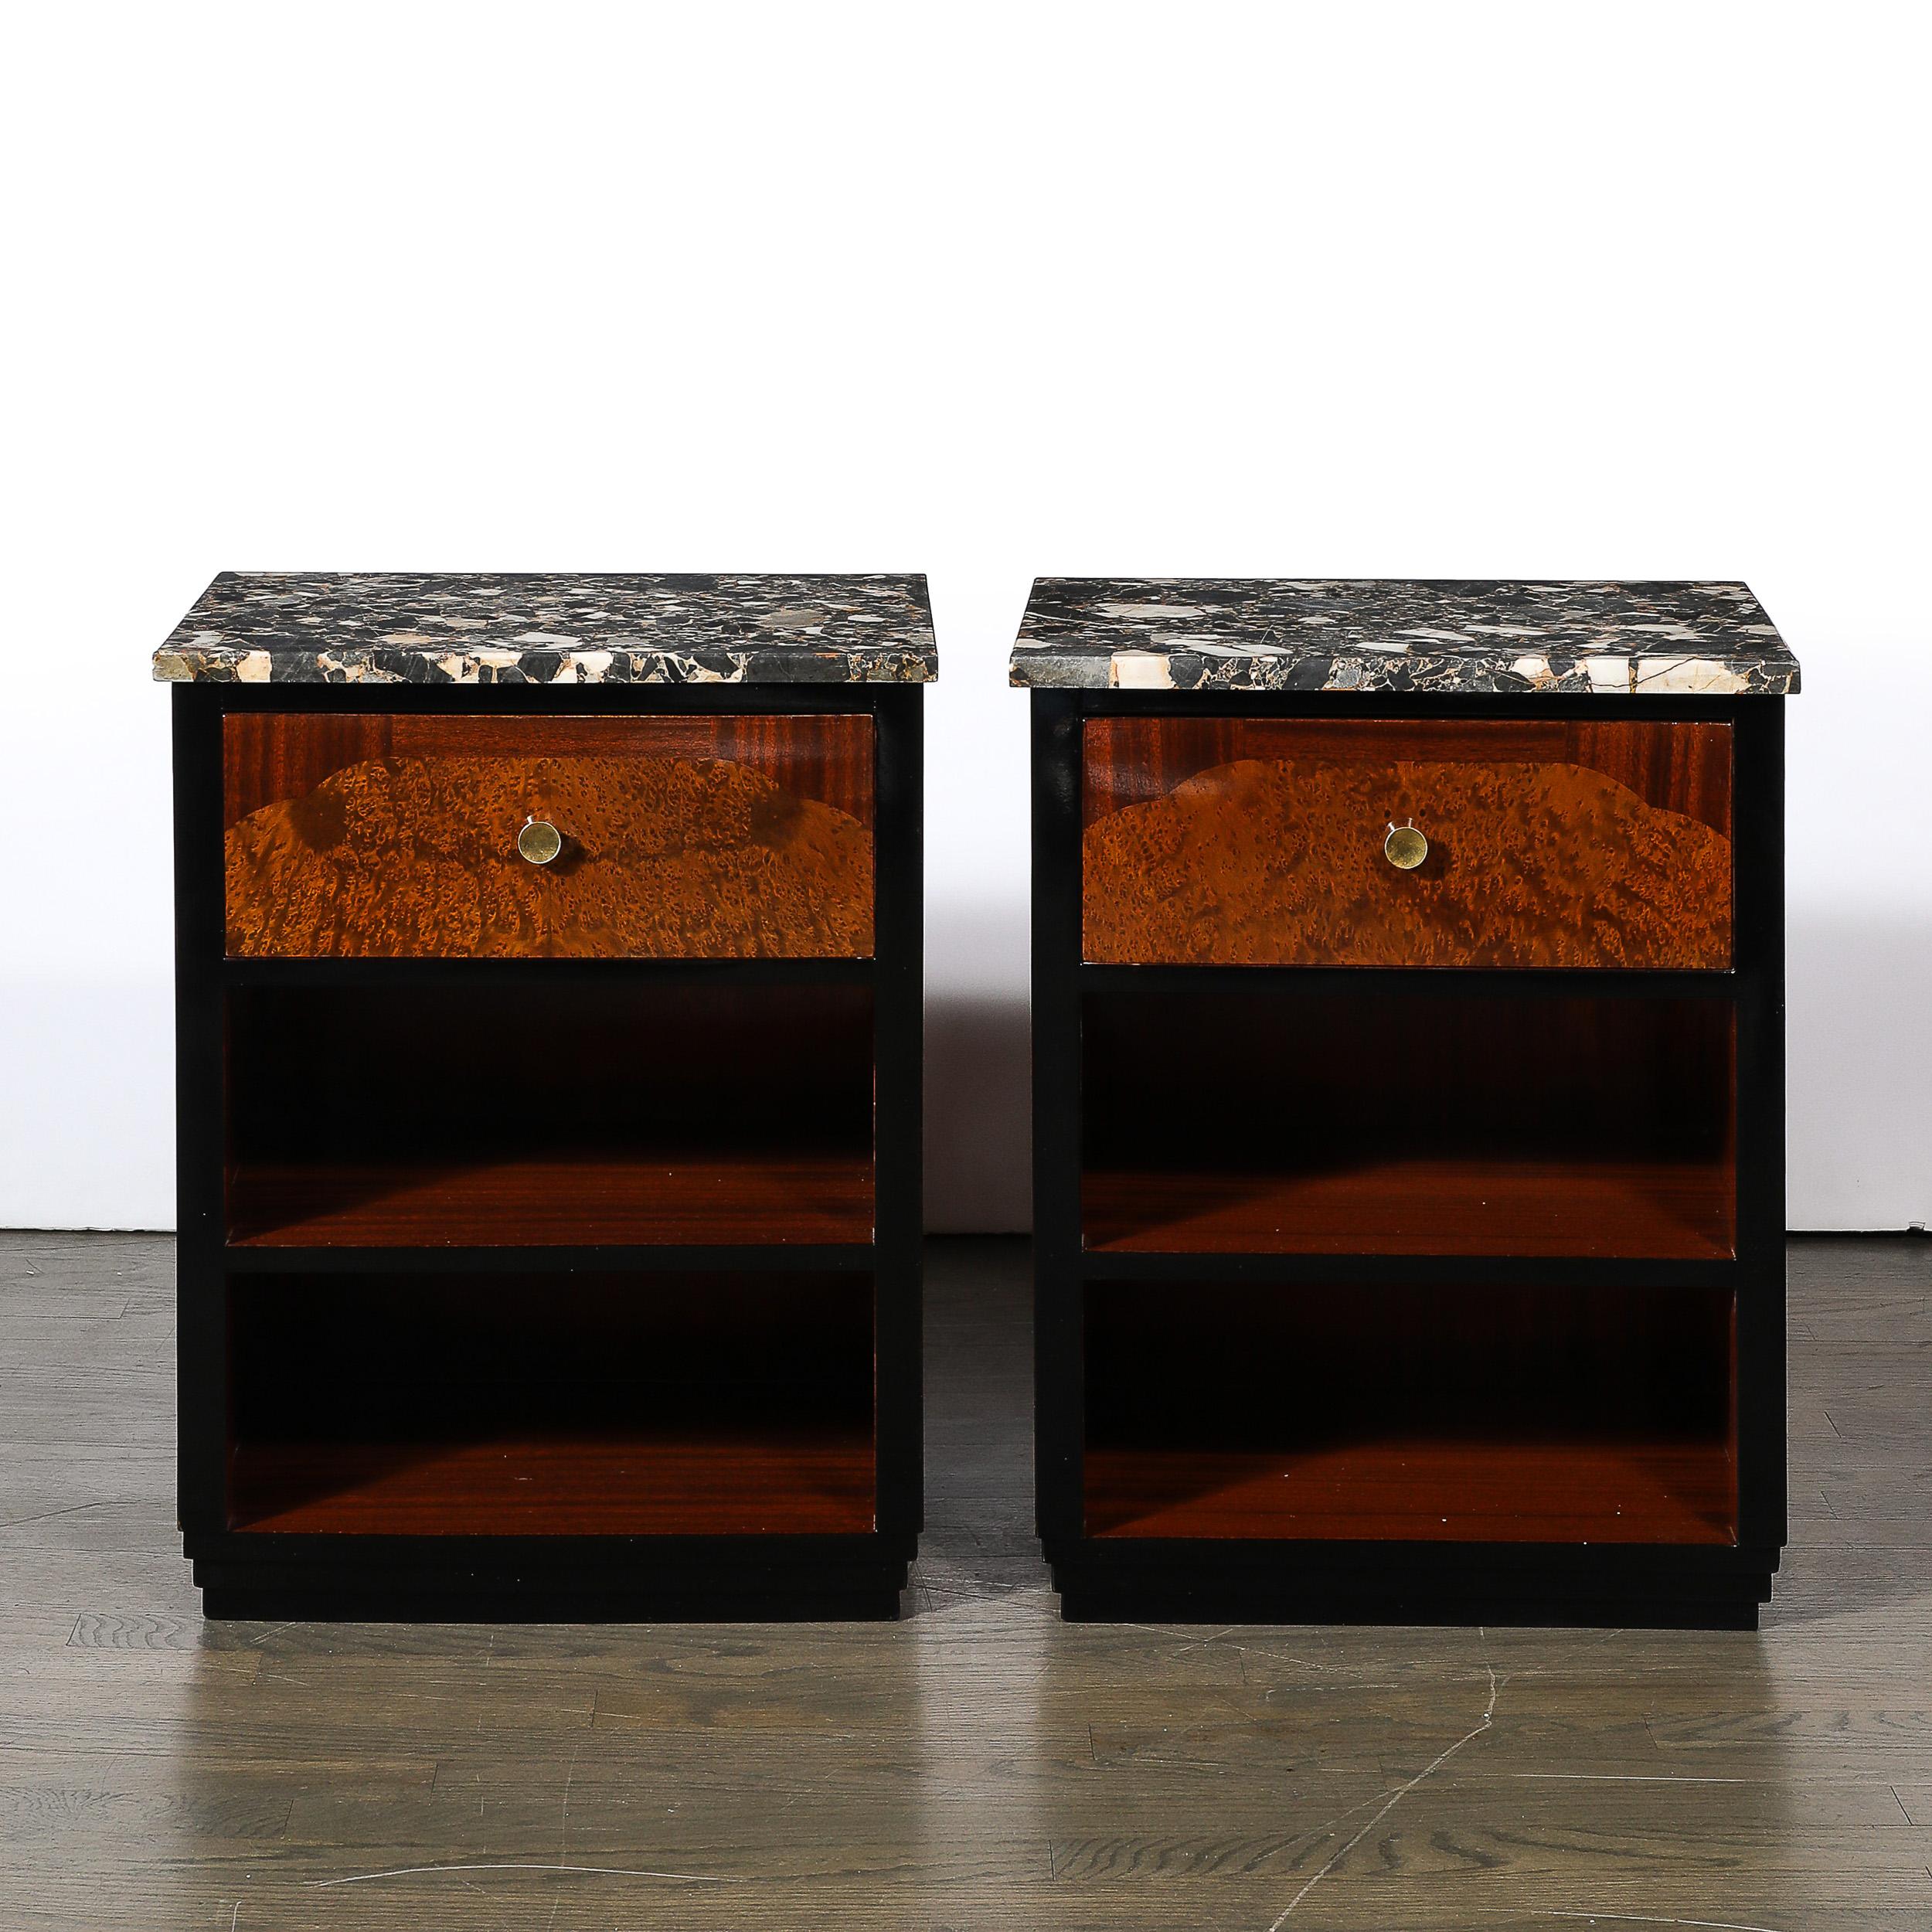 This materially stunning and well formed Pair of Art Deco Marble Top Nightstands in Bookmatched Walnut & Burled Carpathian Elm Inlays W/ Black Lacquer Detailing originate from France, Circa 1935. Featuring a subtle rectilinear profile with